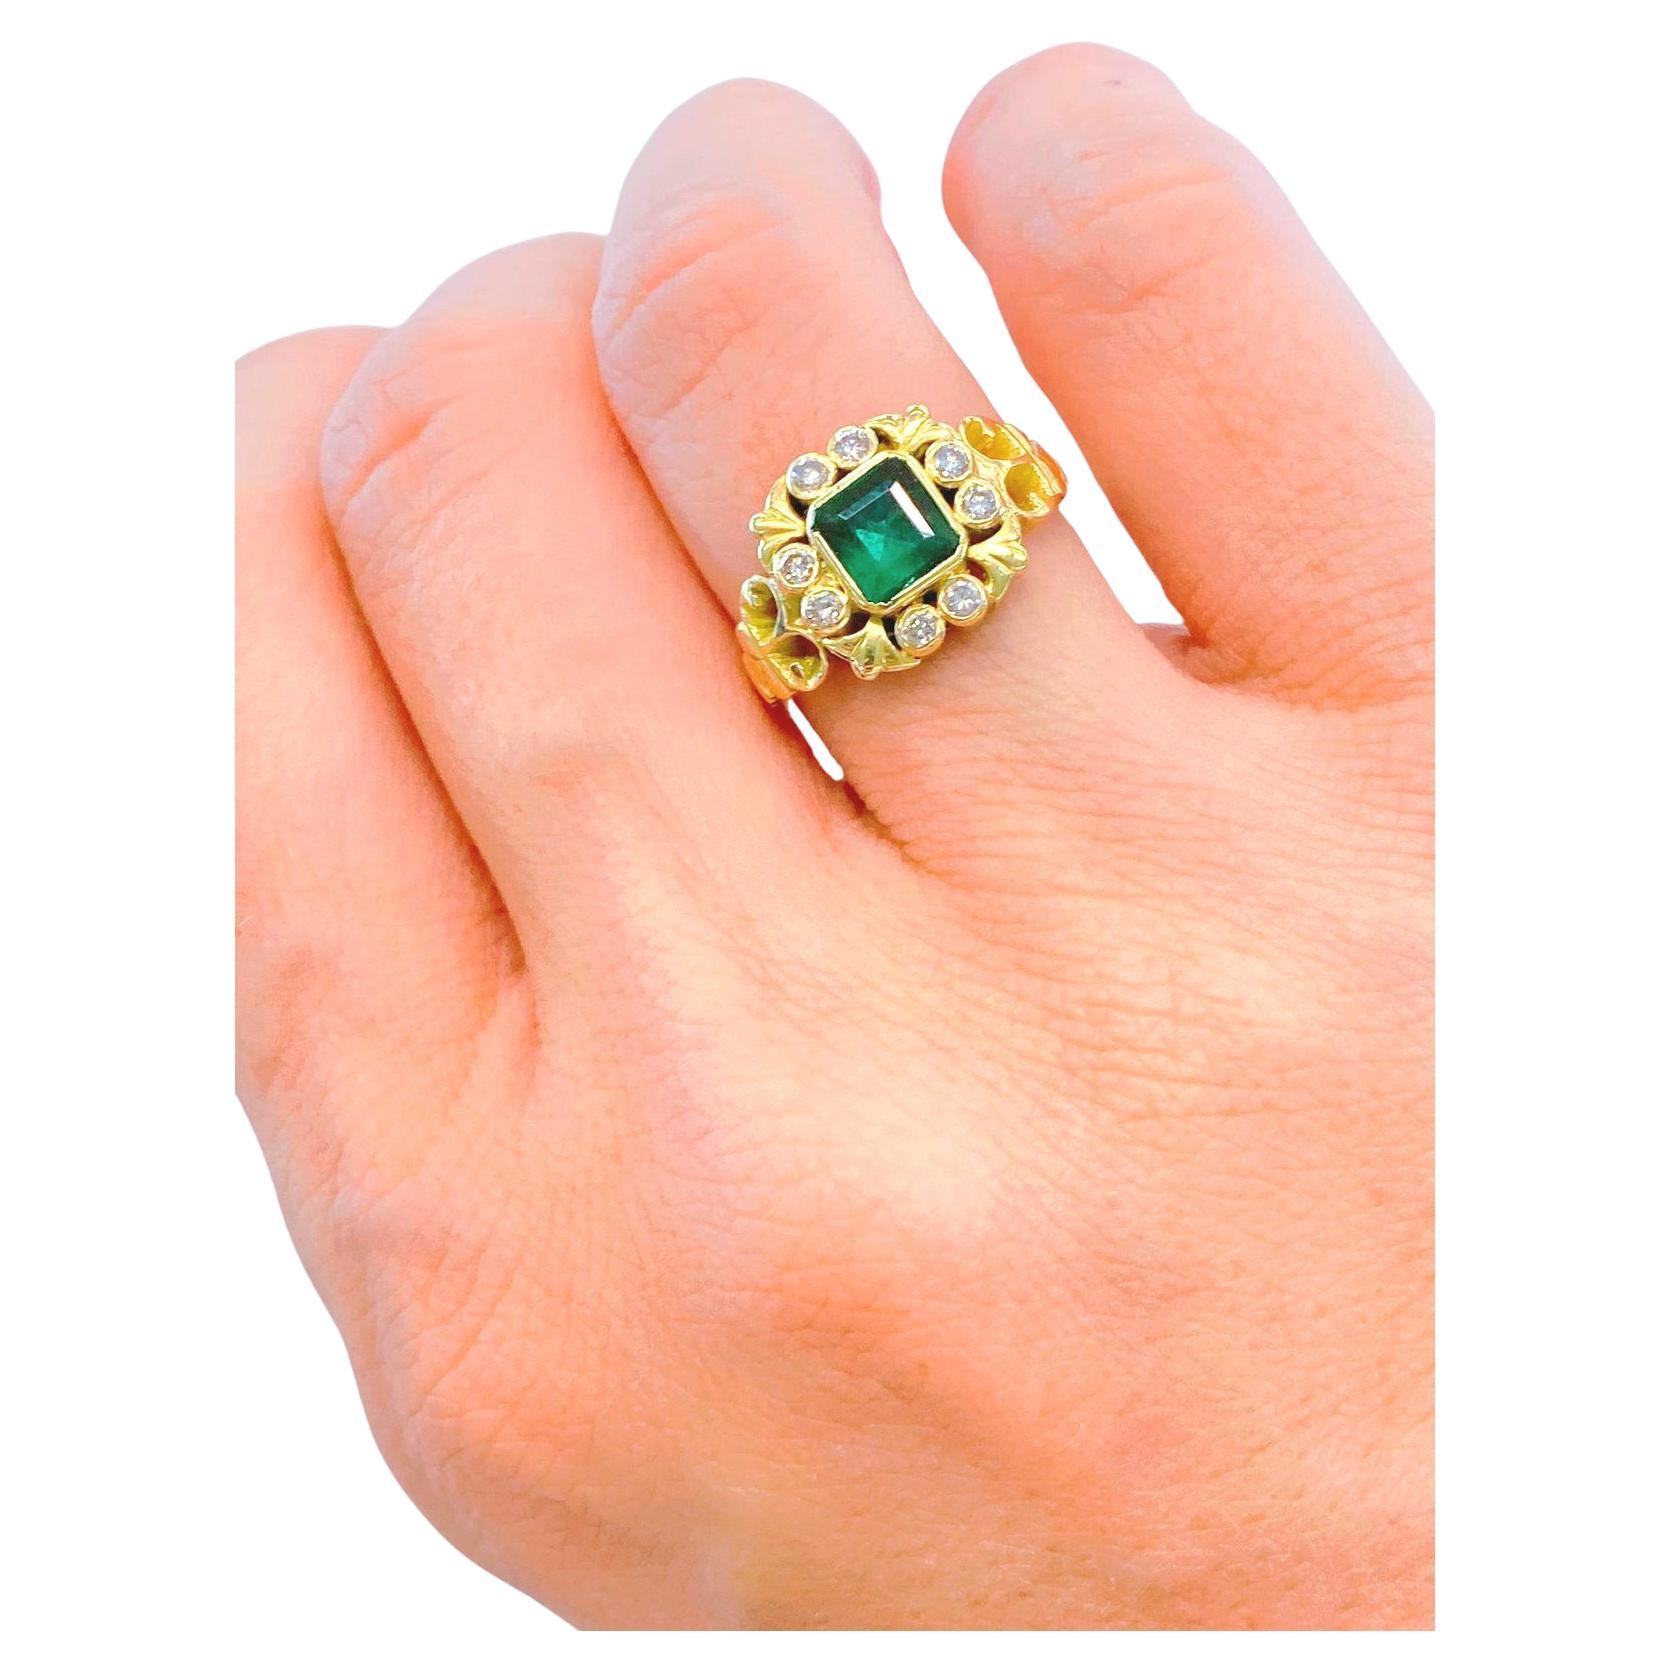 Antique 18k gold ring centered with a natural green emerald diameter of 5.80mm×5.60mm flanked with old mine cut diamonds estimate weight 0.40 ct hall marked 750 gold finest